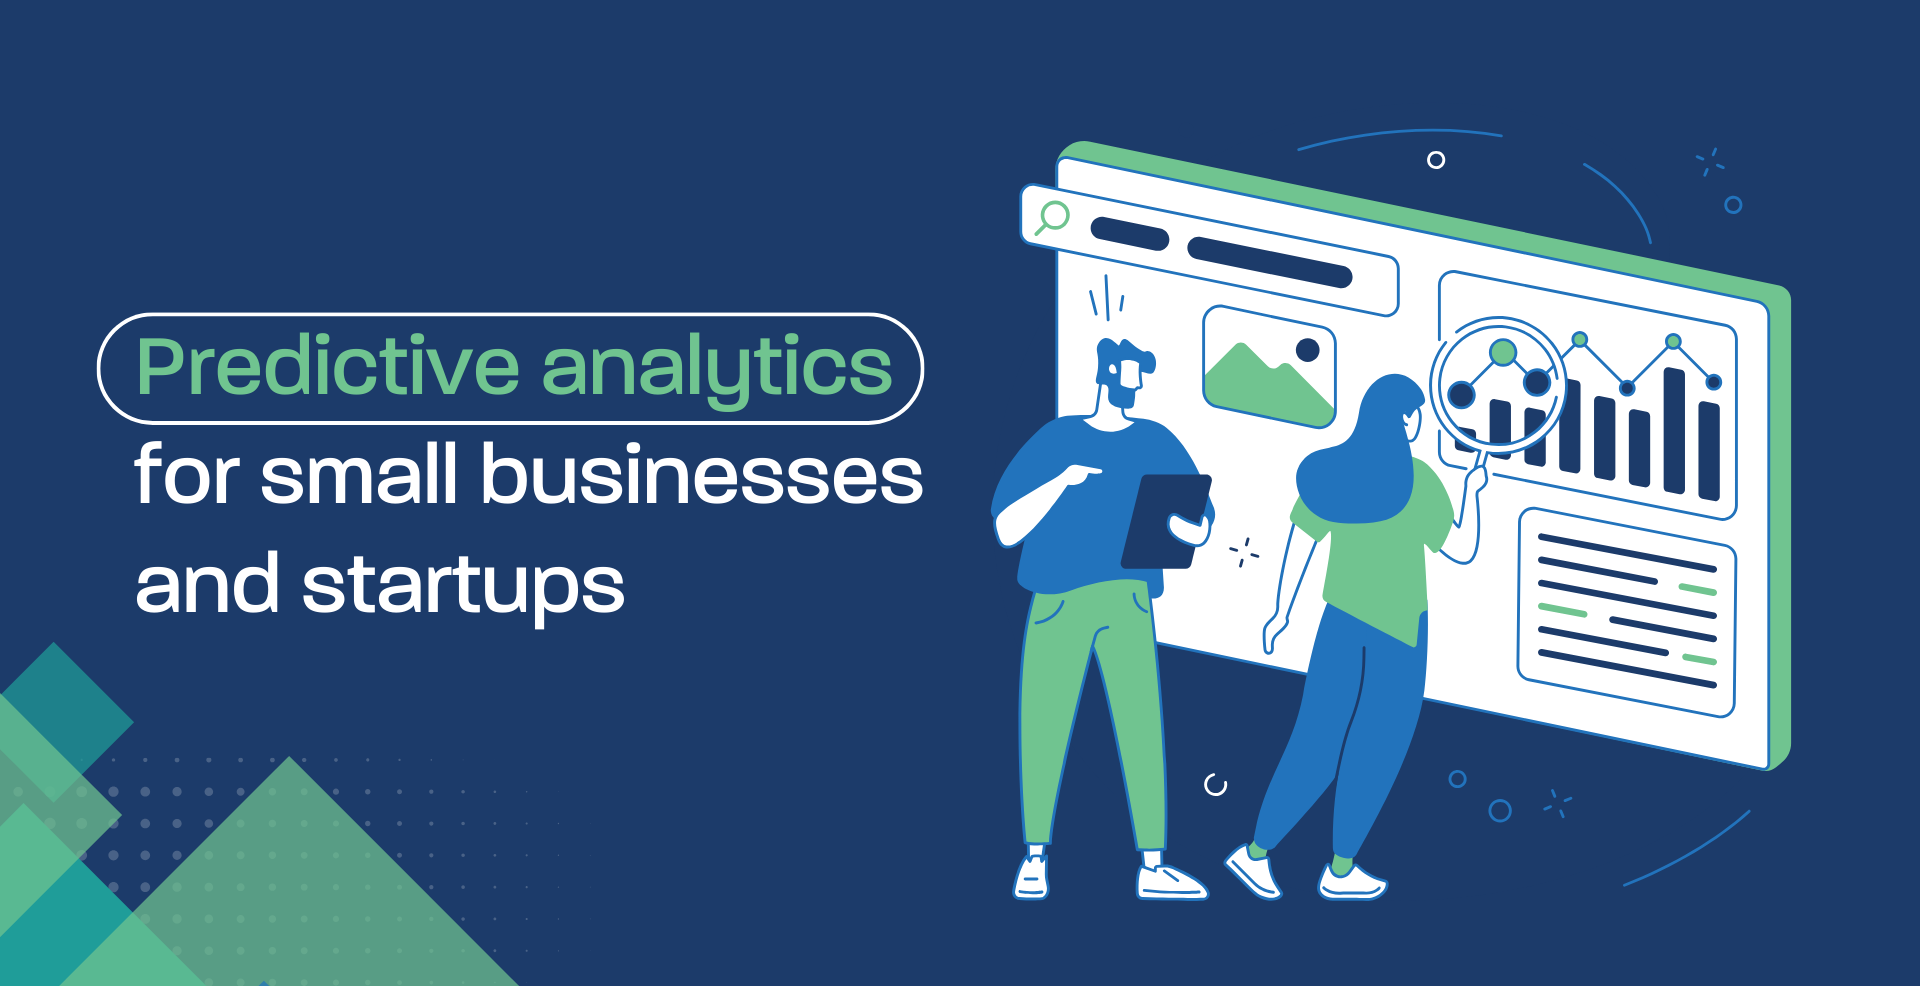 Predictive analytics for small businesses and startups